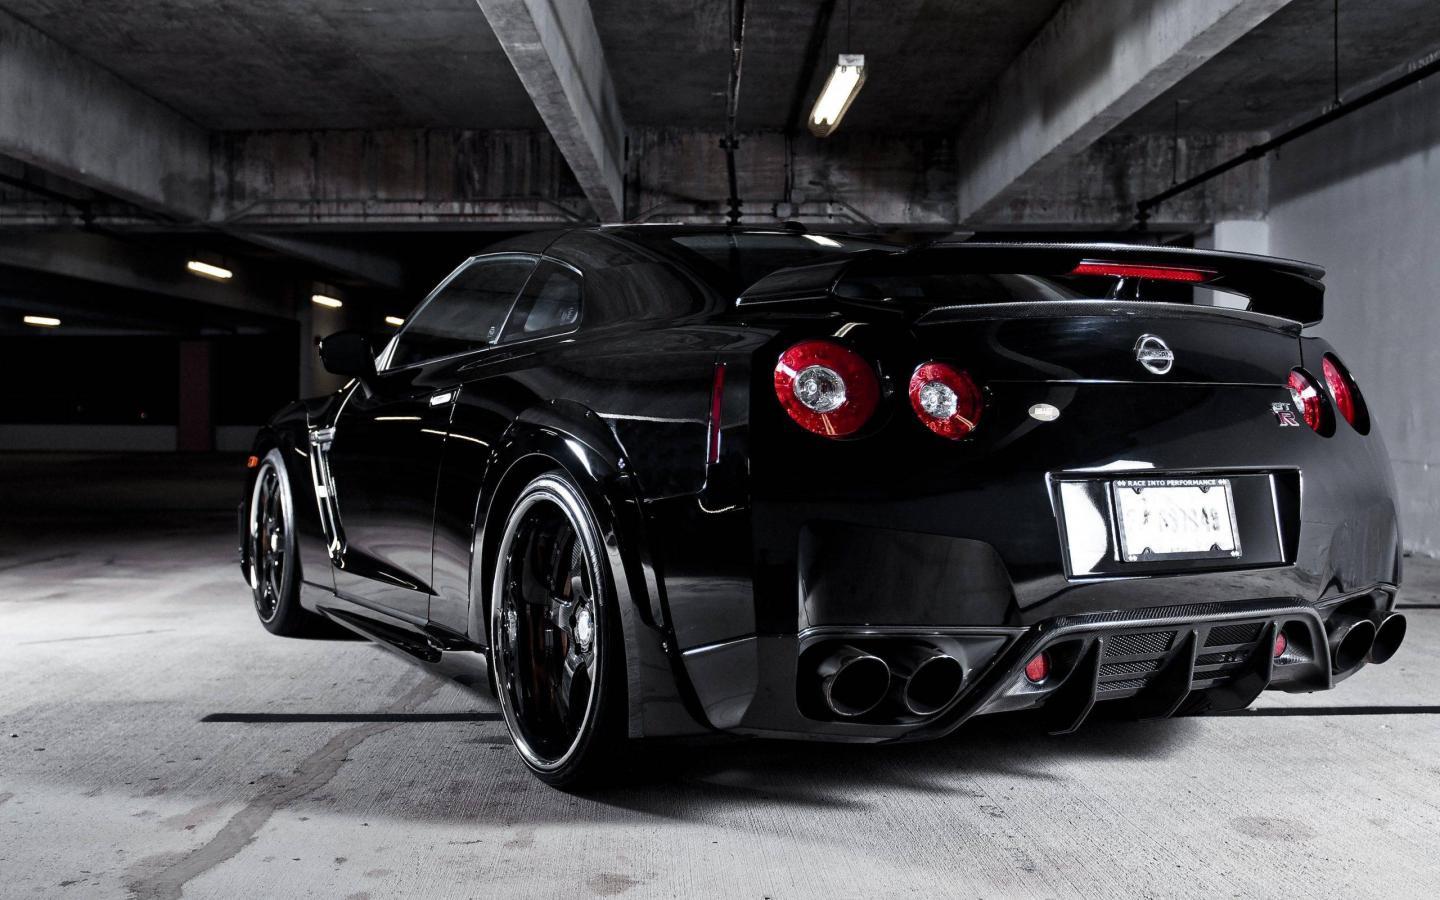 image Of Nissan GT R In Black In Rear View. New Car Wallpaper